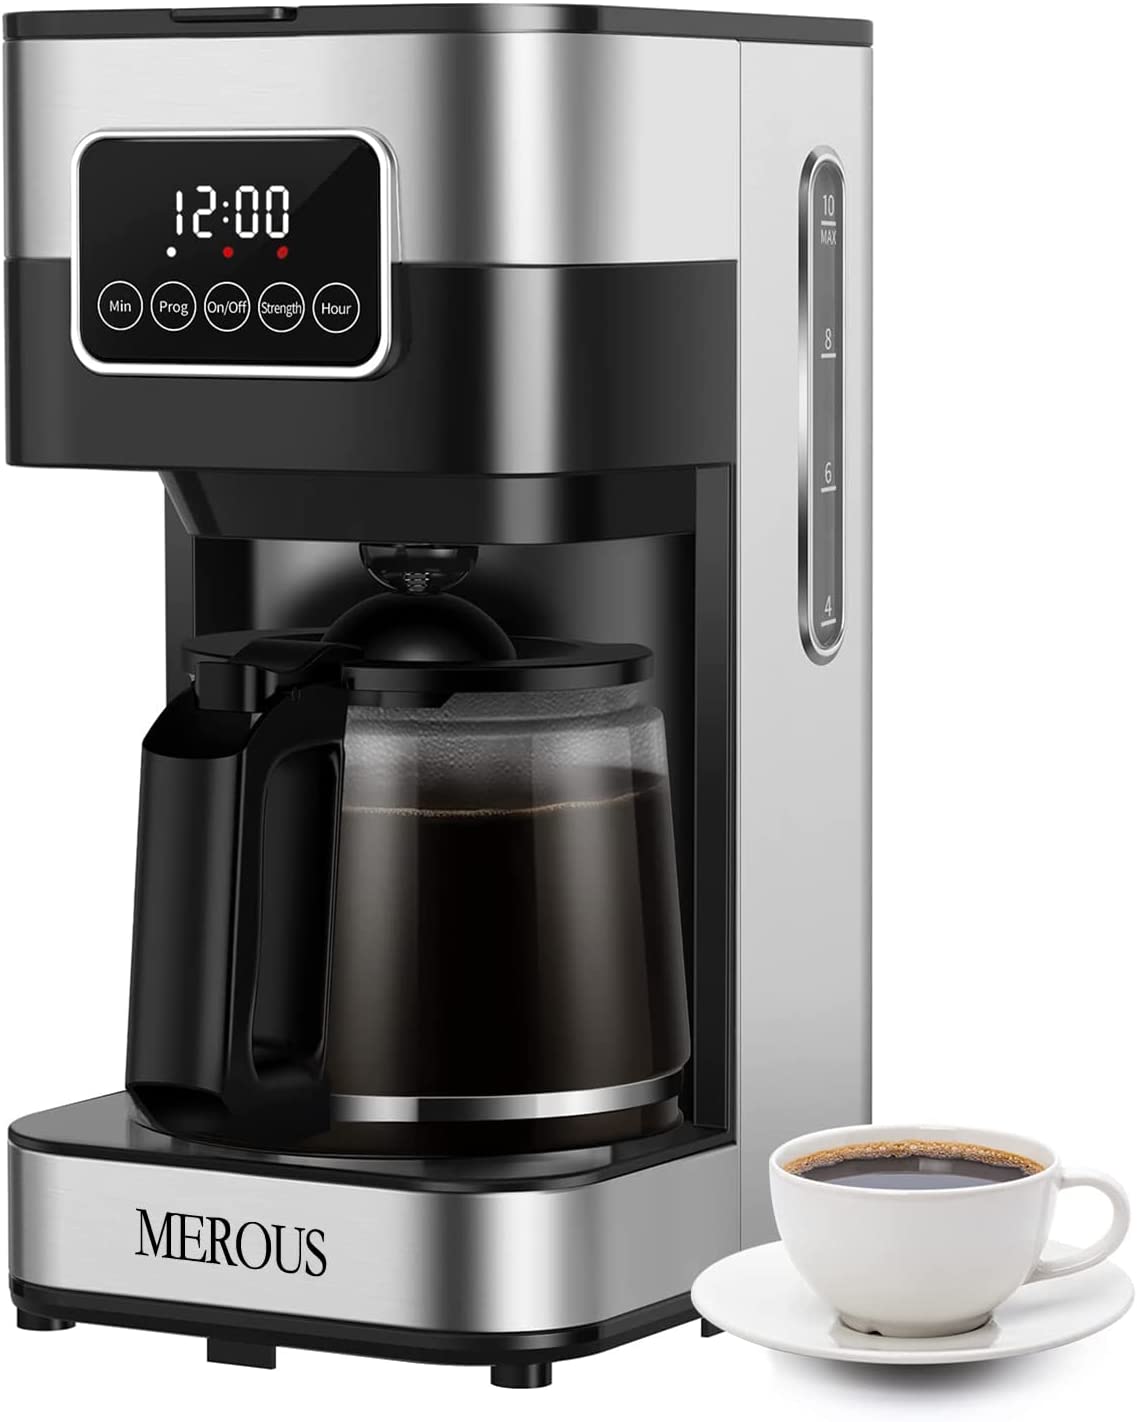 MEROUS Filter Coffee Machine, Programmable Coffee Maker with Carafe, LED Touch Screen, 1.25 L, up to 12 Cups, Stainless Steel, Silver